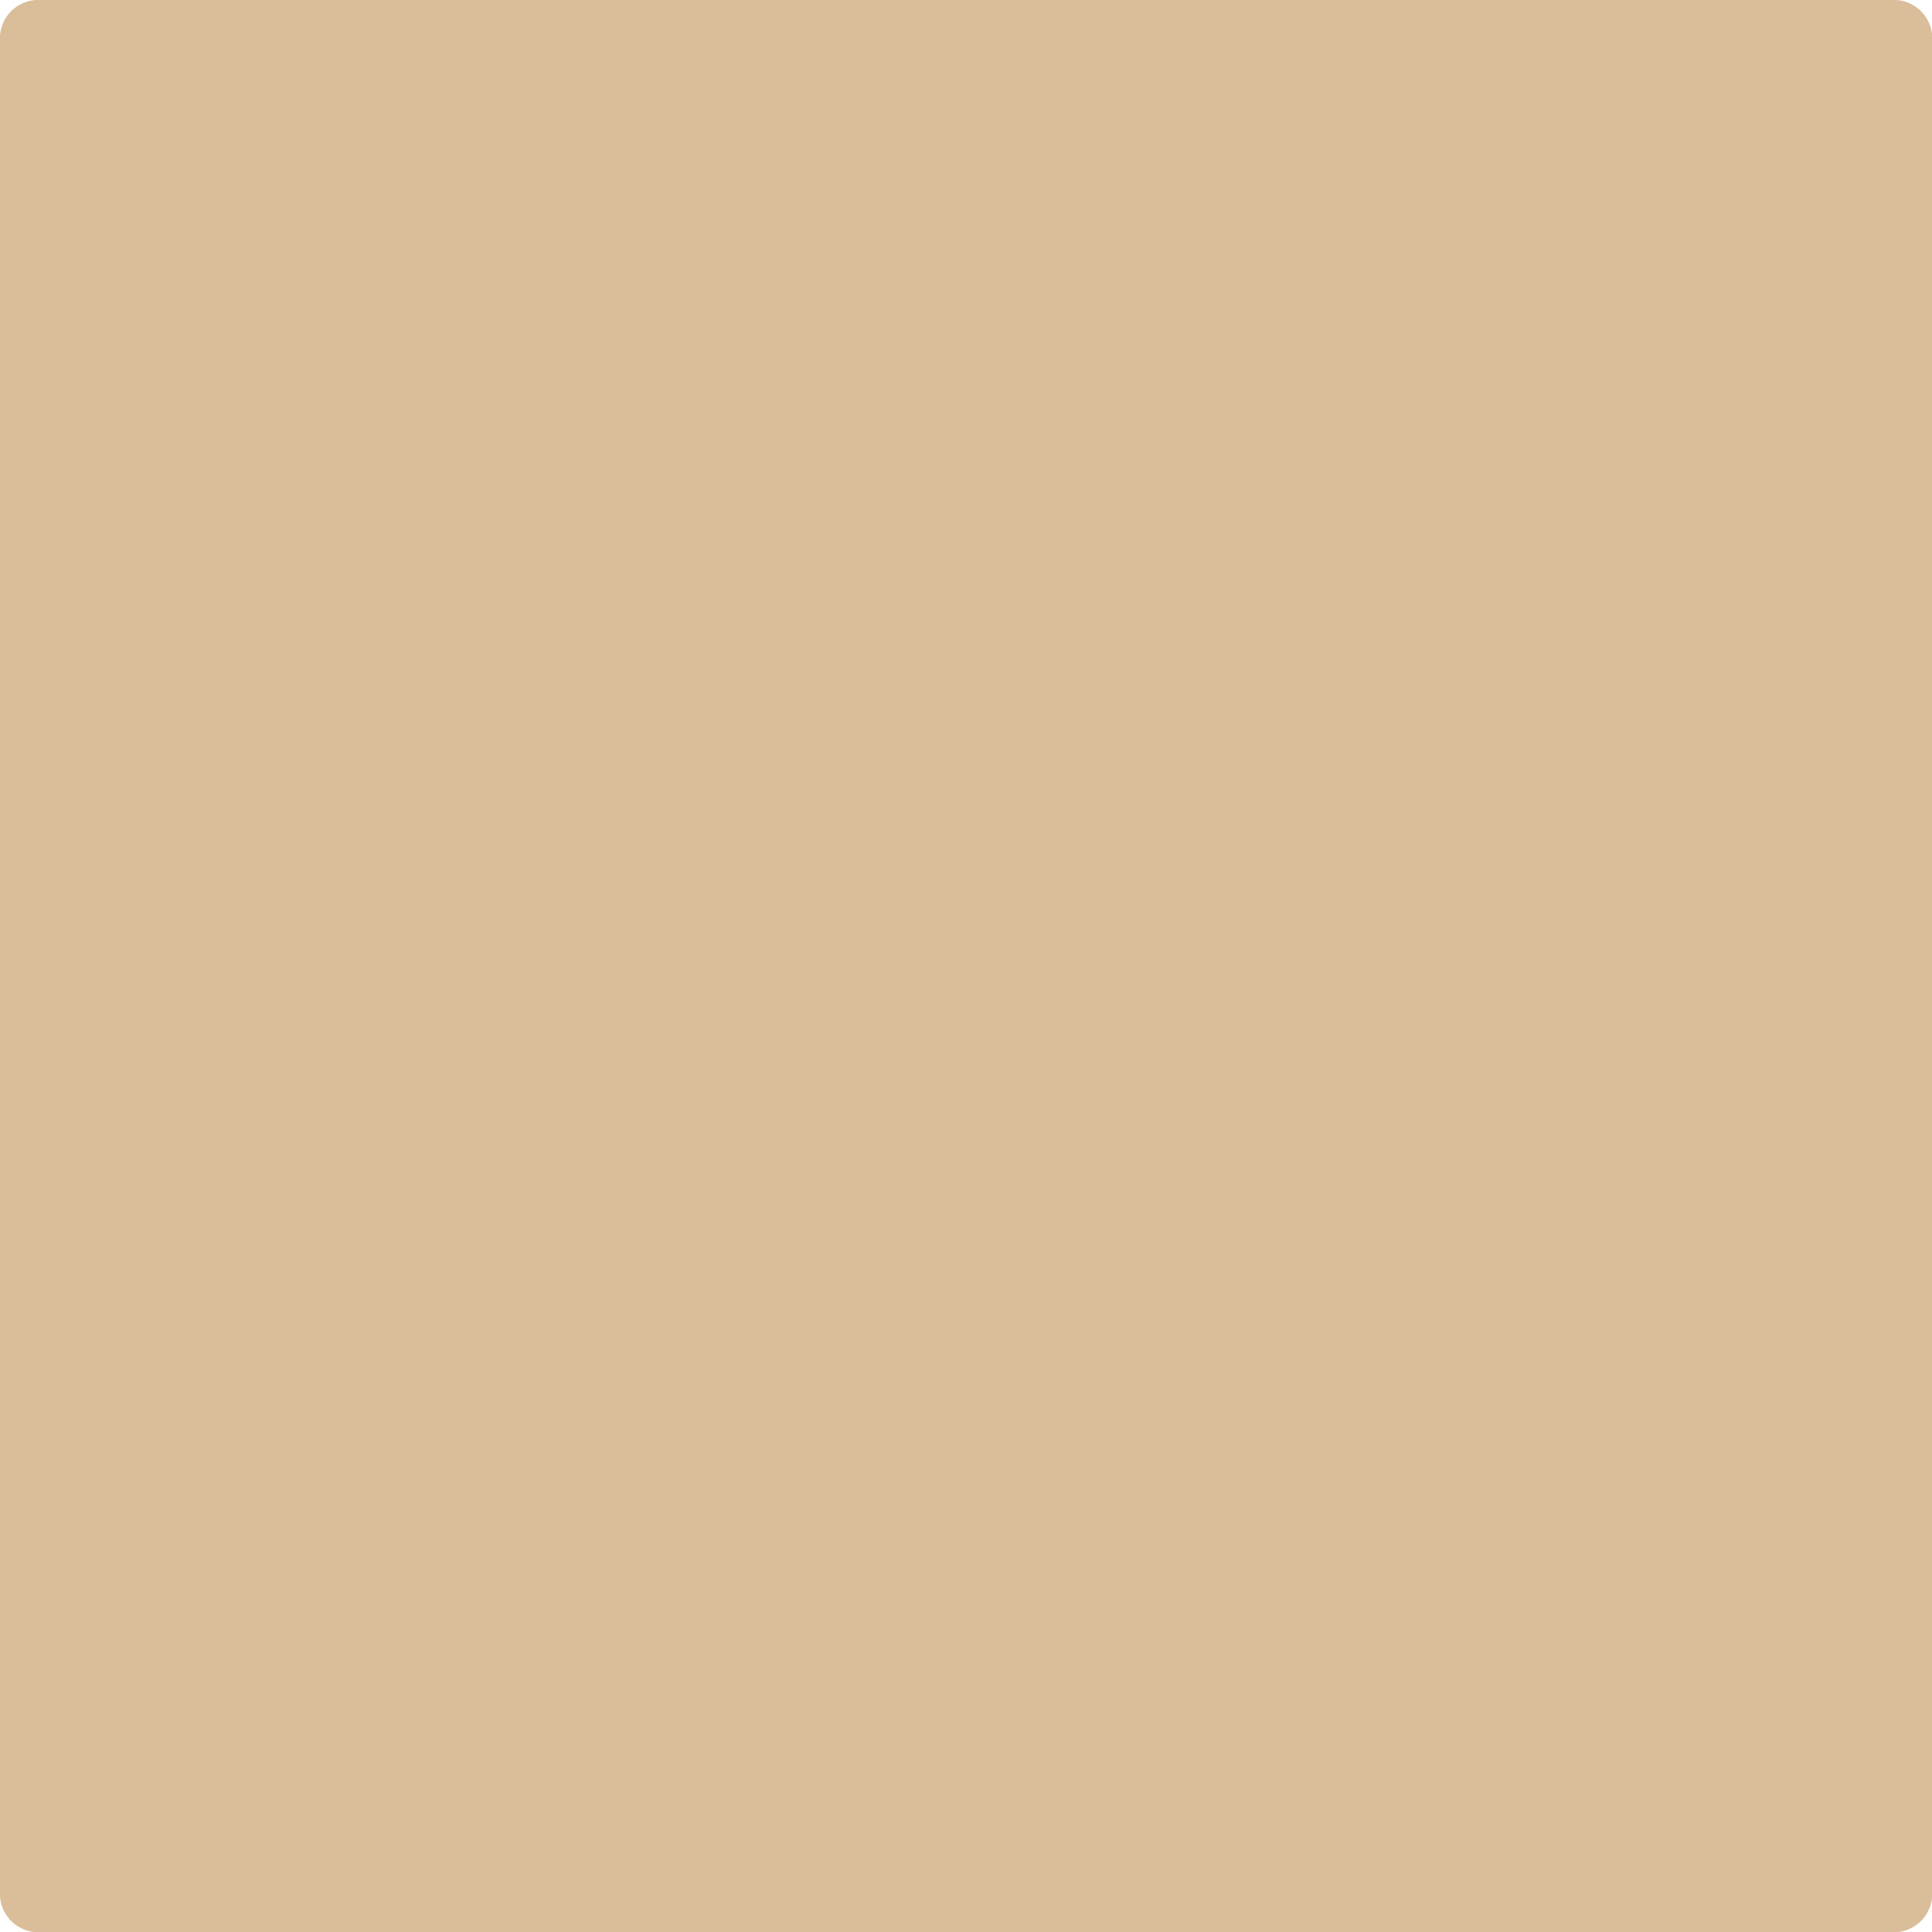 1116 Sepia Tan a Paint Color by Benjamin Moore